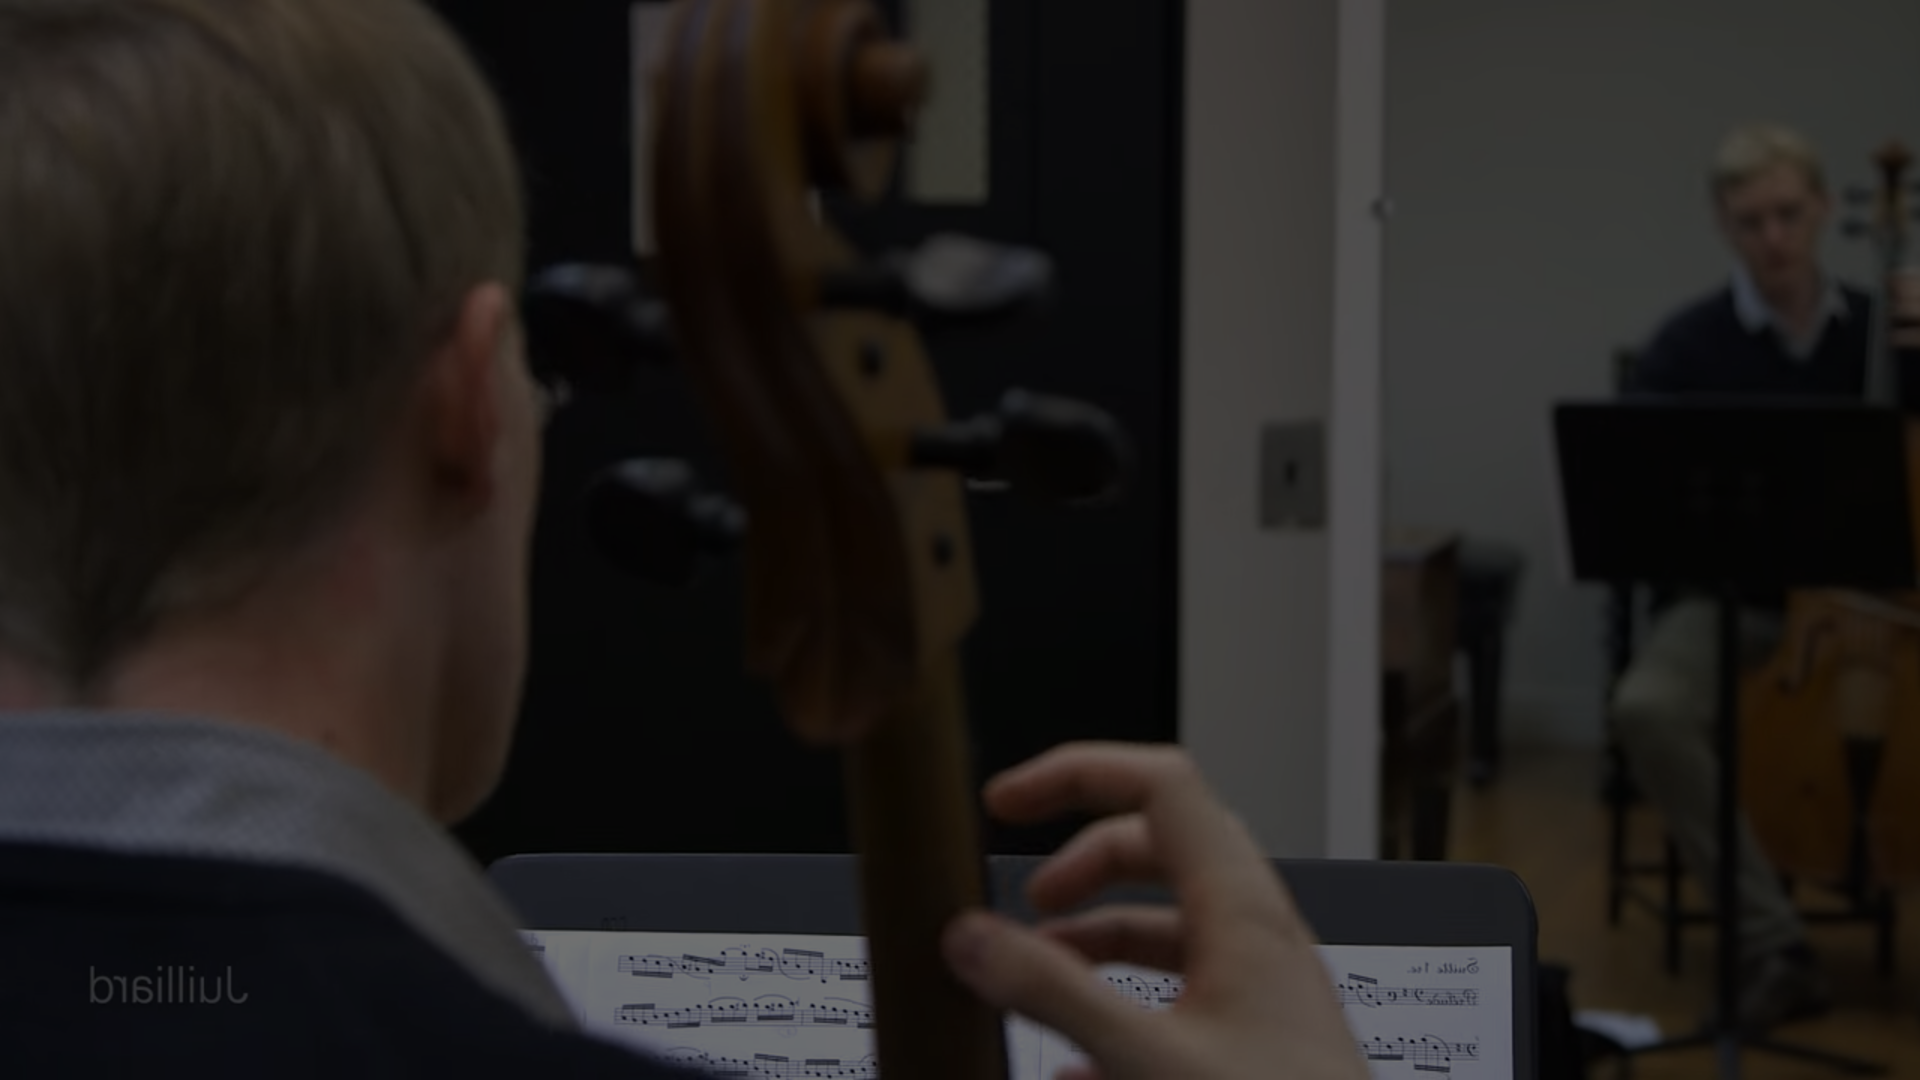 Video feature on a day in the life of Juilliard Historical Performance student Alexander Nicholls